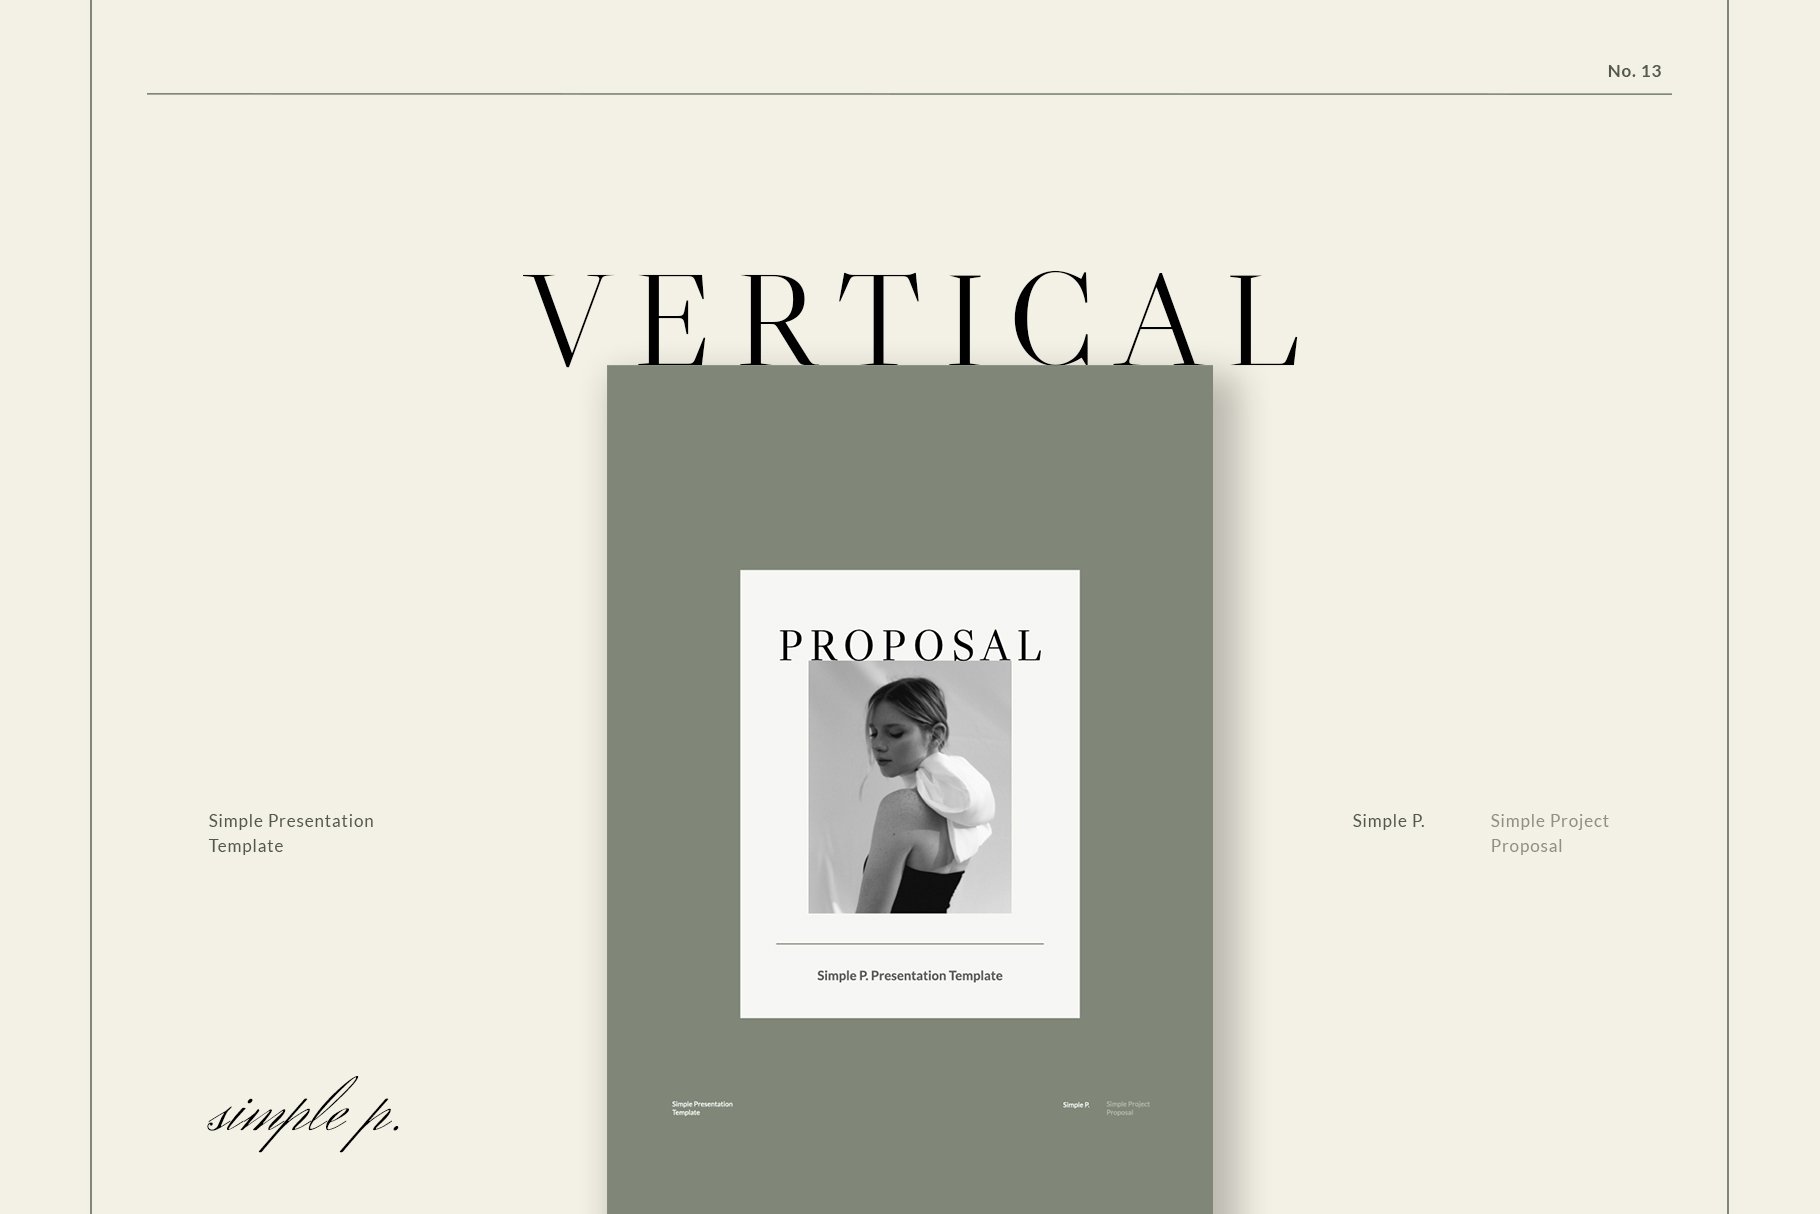 Proposal Vertical Template cover image.